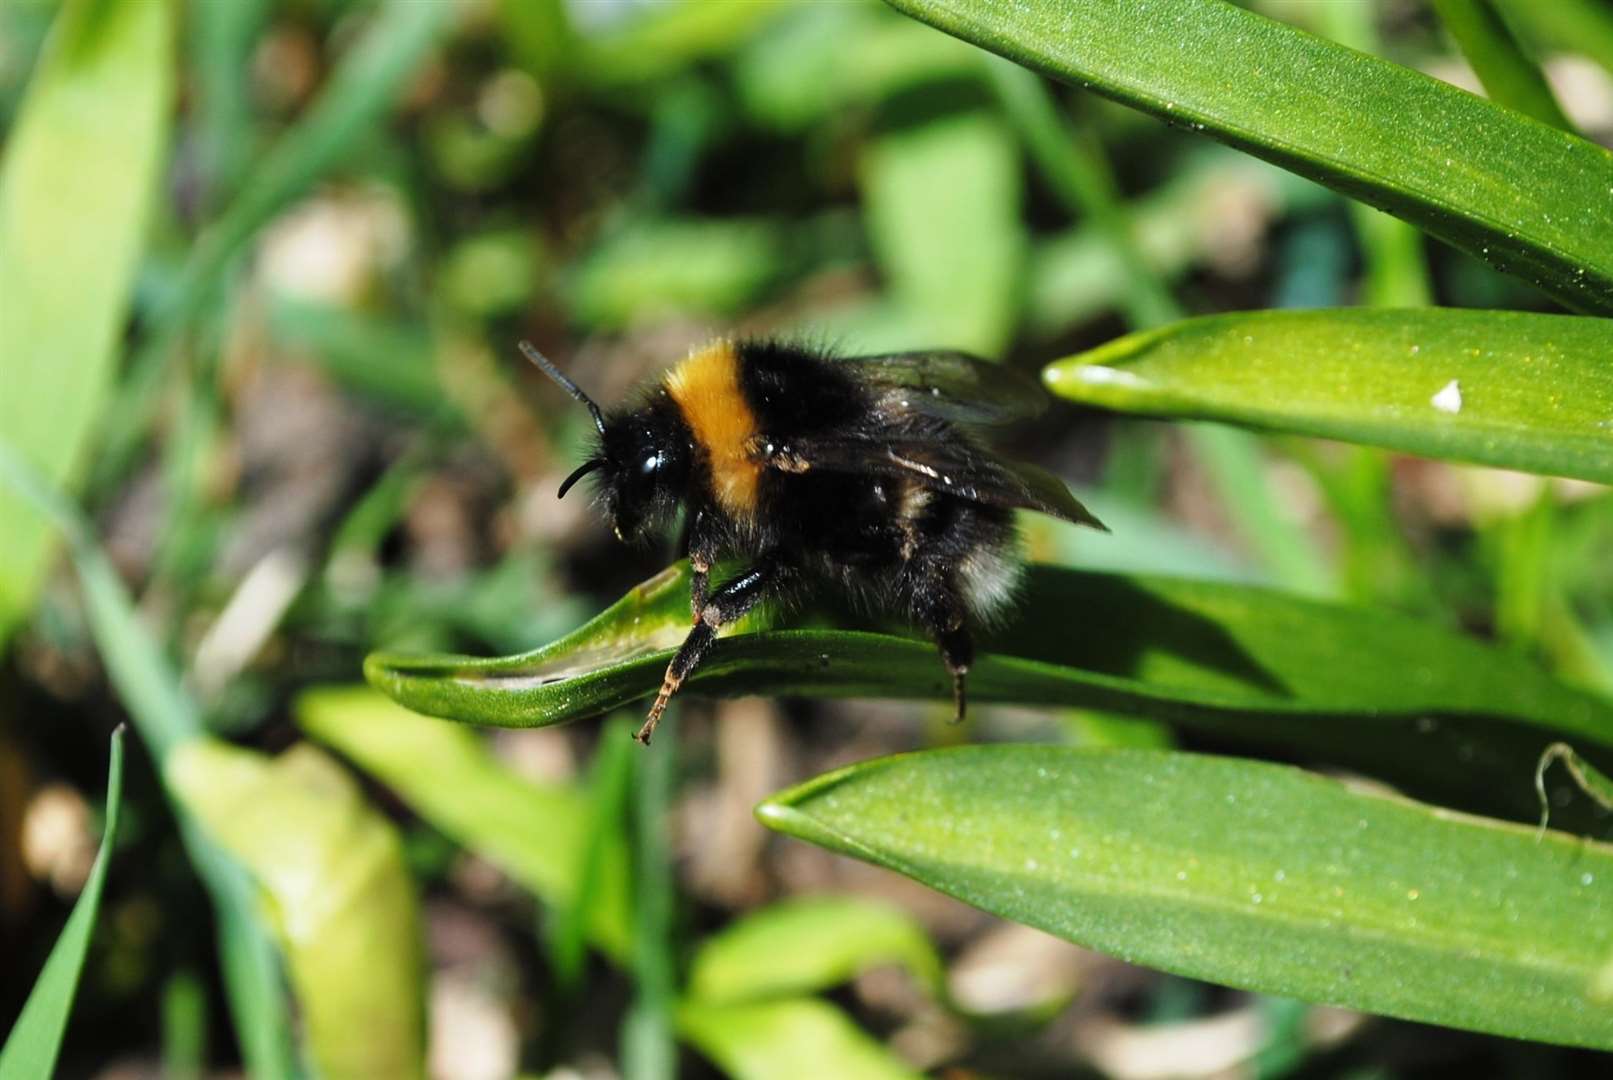 The exact reasons for Kent's unusually high rare bumblebee population are unknown